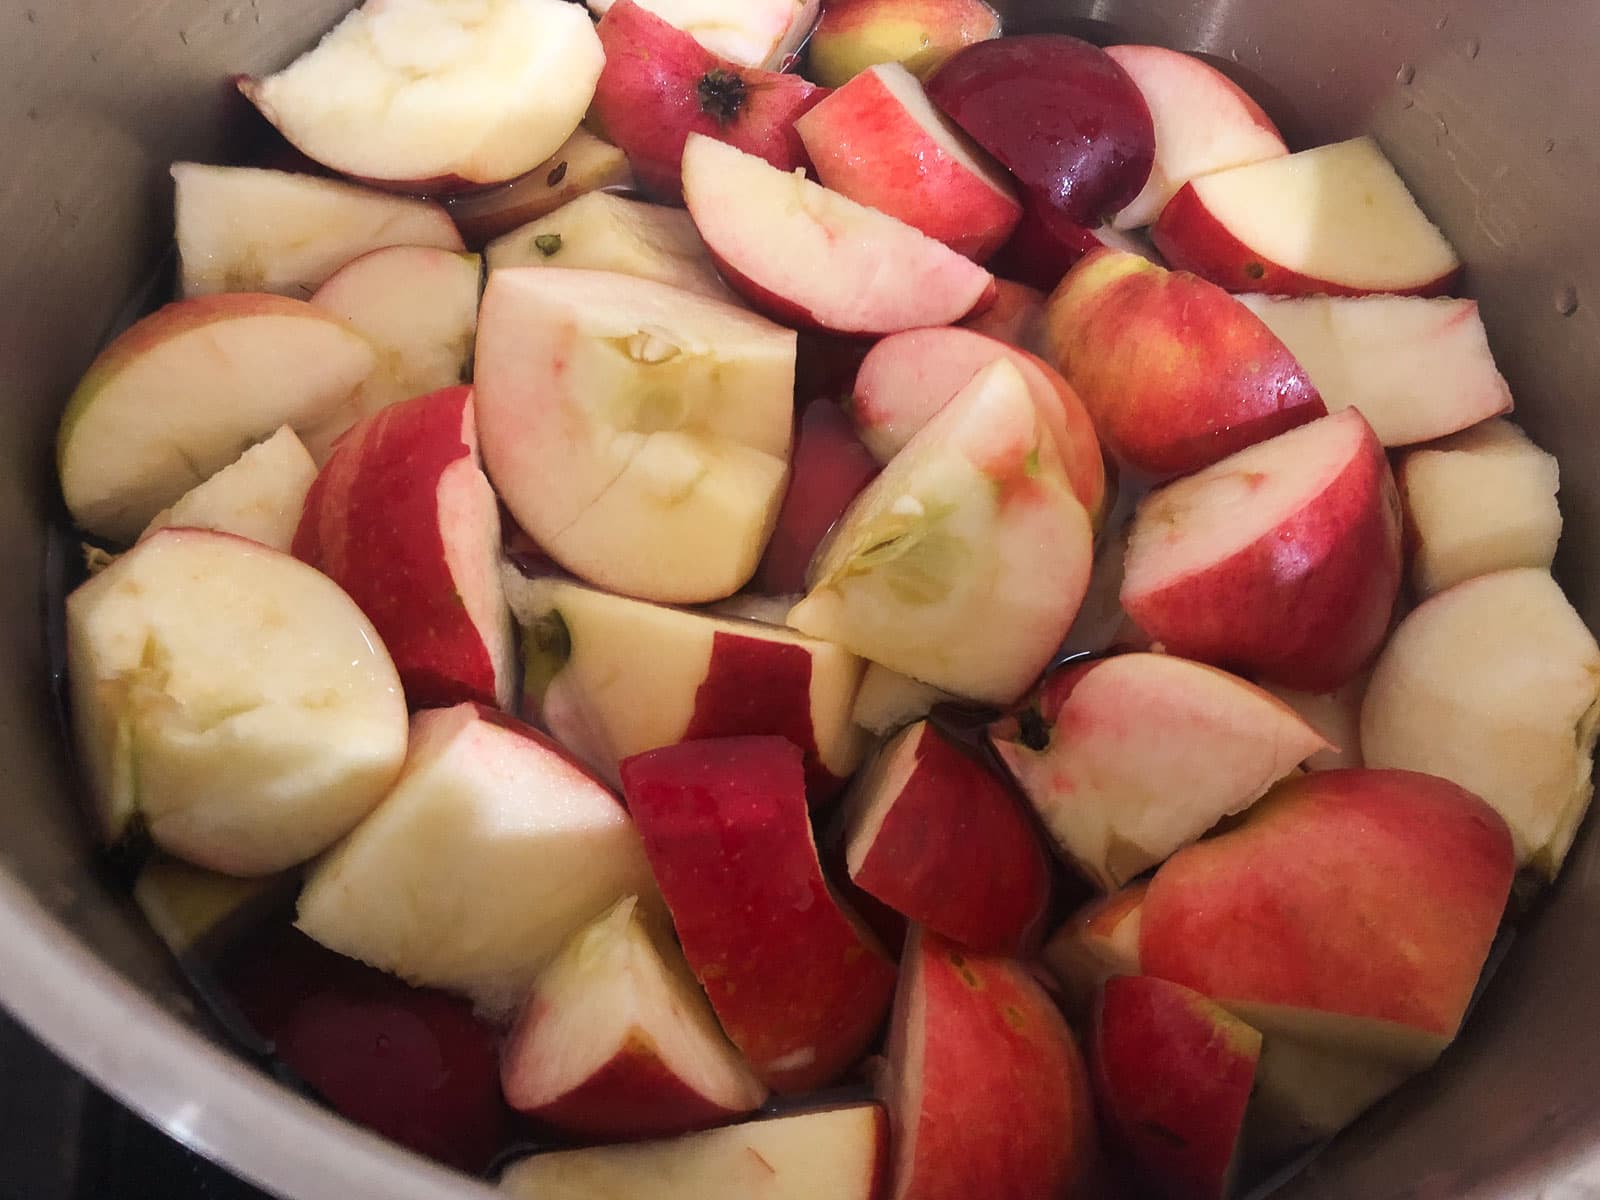 Chopped red apples sitting in a colander